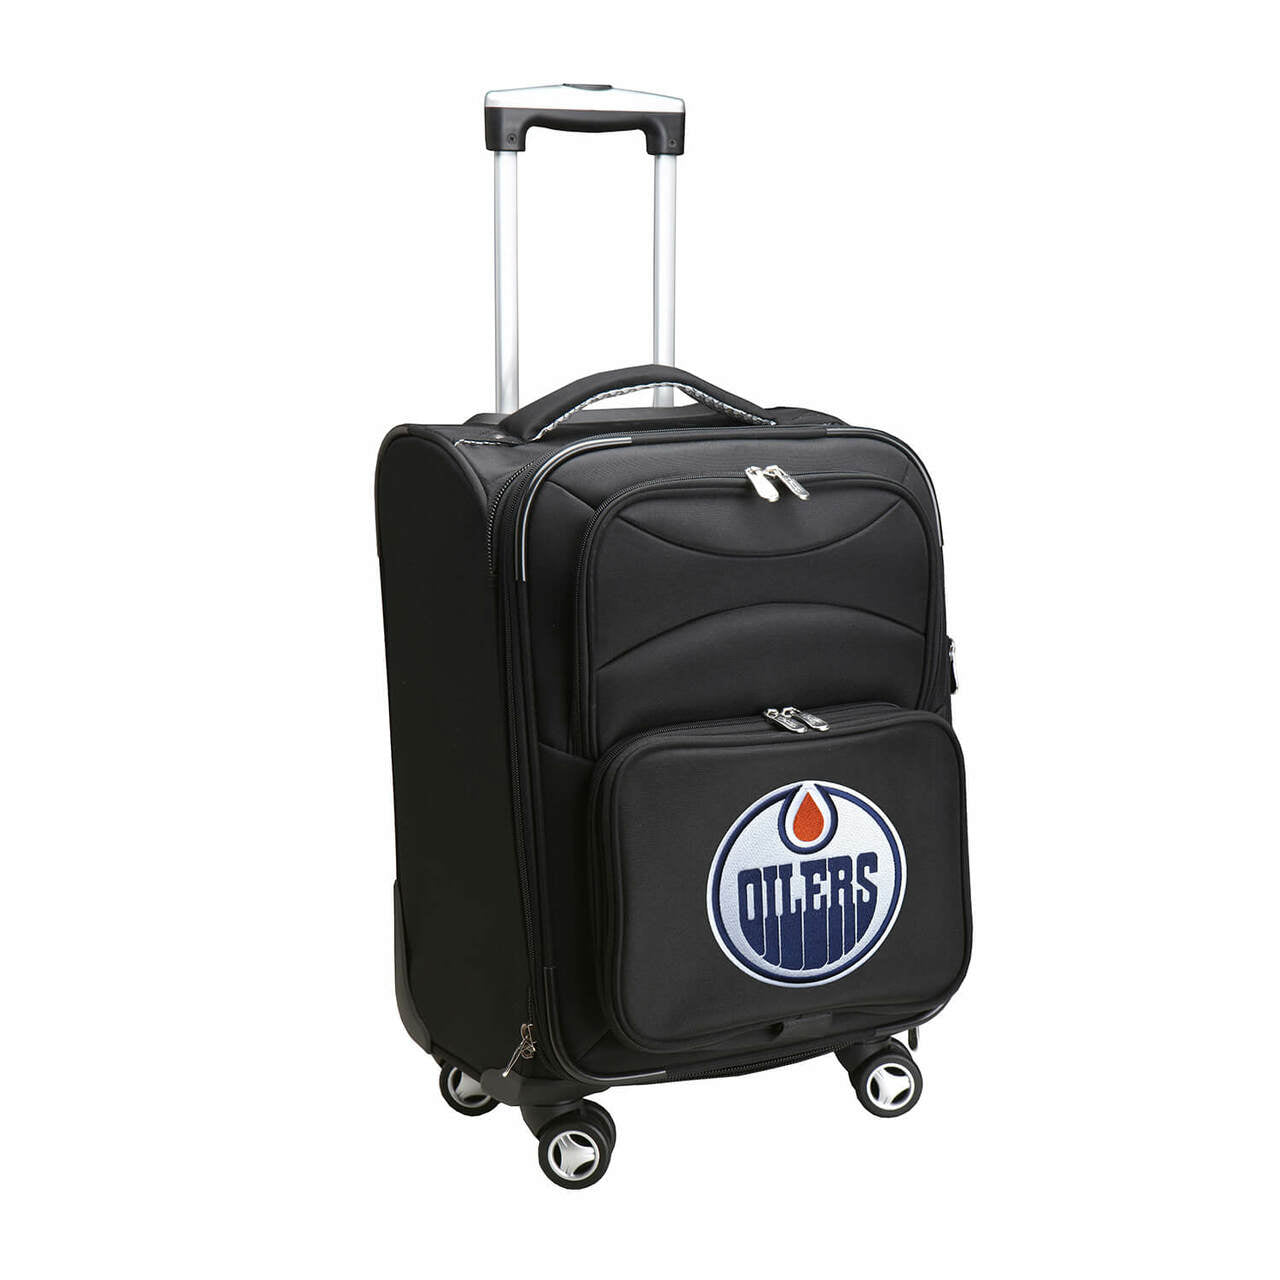 Edmonton Oilers 21" Carry-on Spinner Luggage